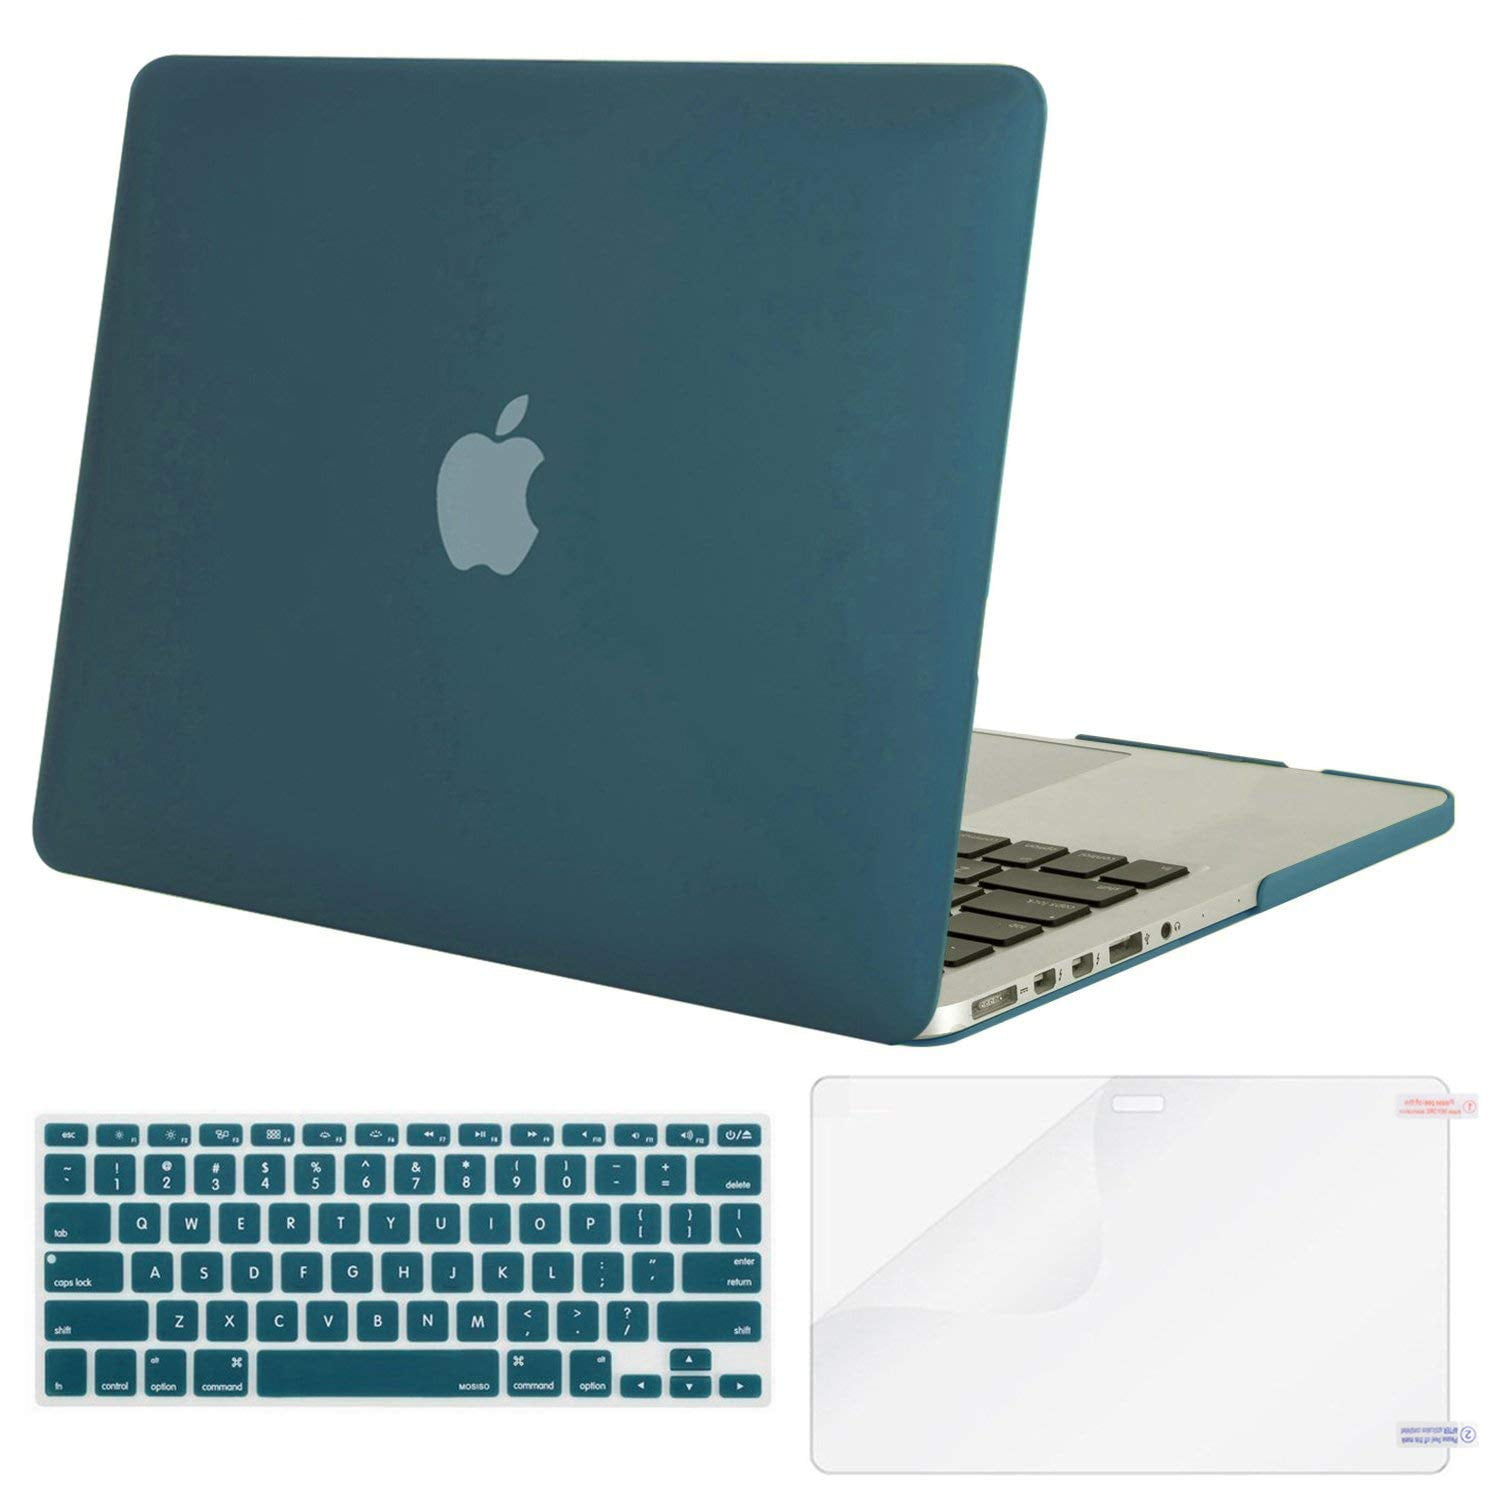 Mosiso 3 in 1 Plastic Hard Cover Case for MacBook Pro Retina 13 Inch (A1502/A1425), Deep Teal